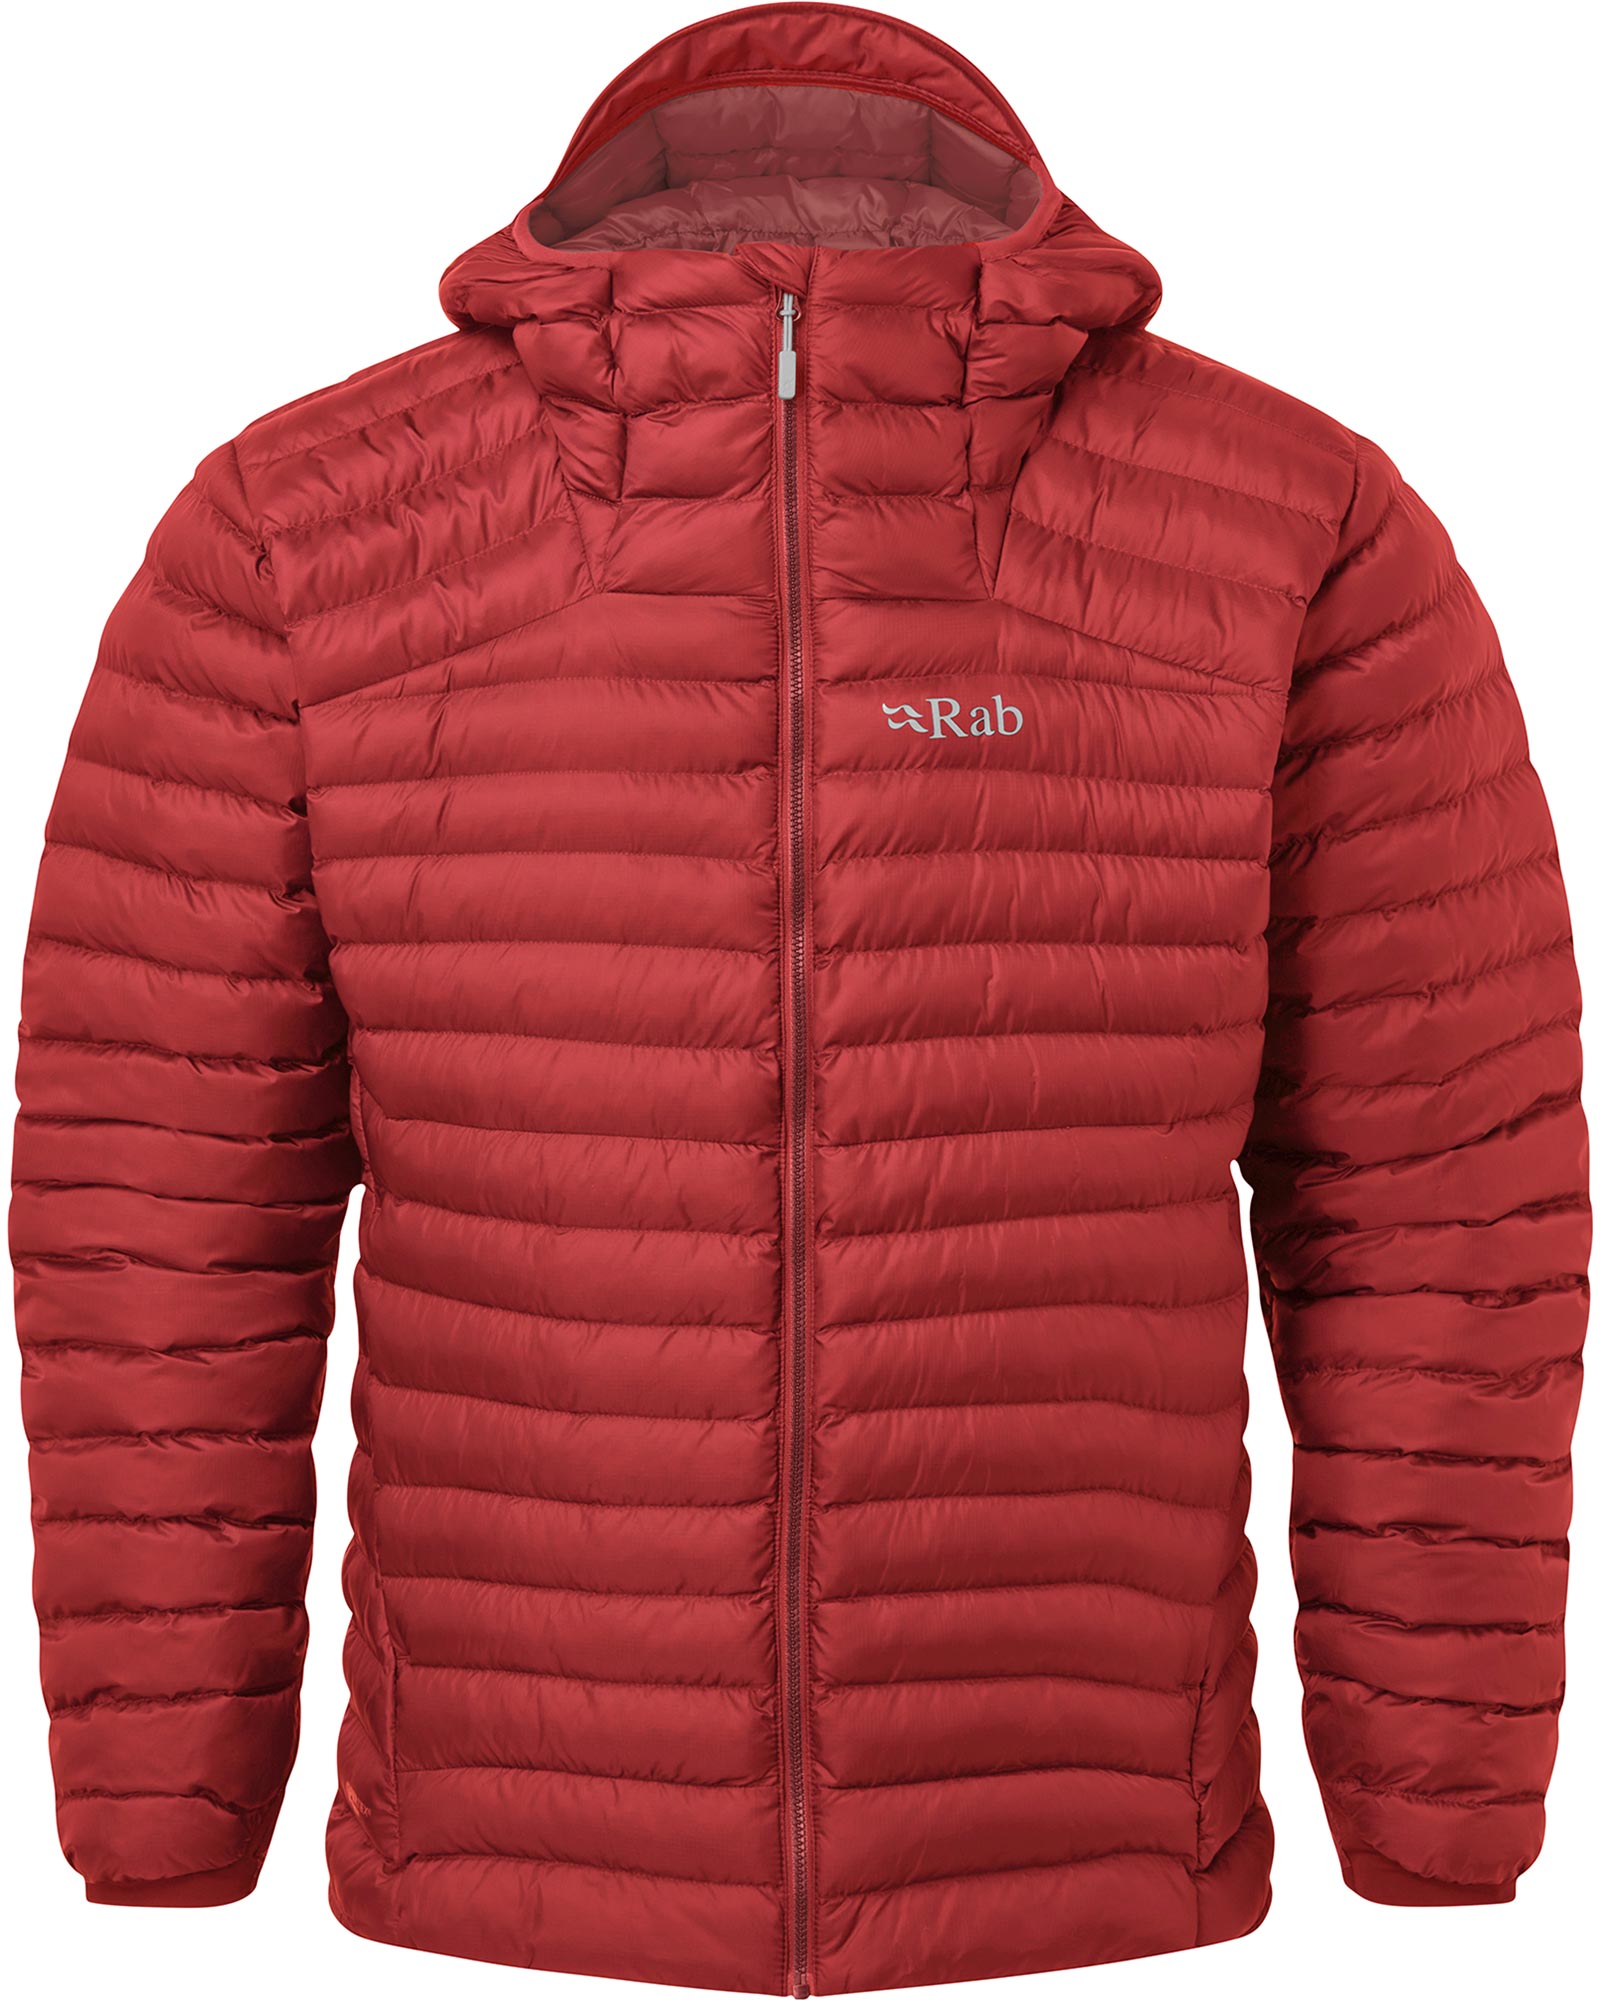 Rab Cirrus Alpine Men’s Insulated Jacket - Ascent Red S